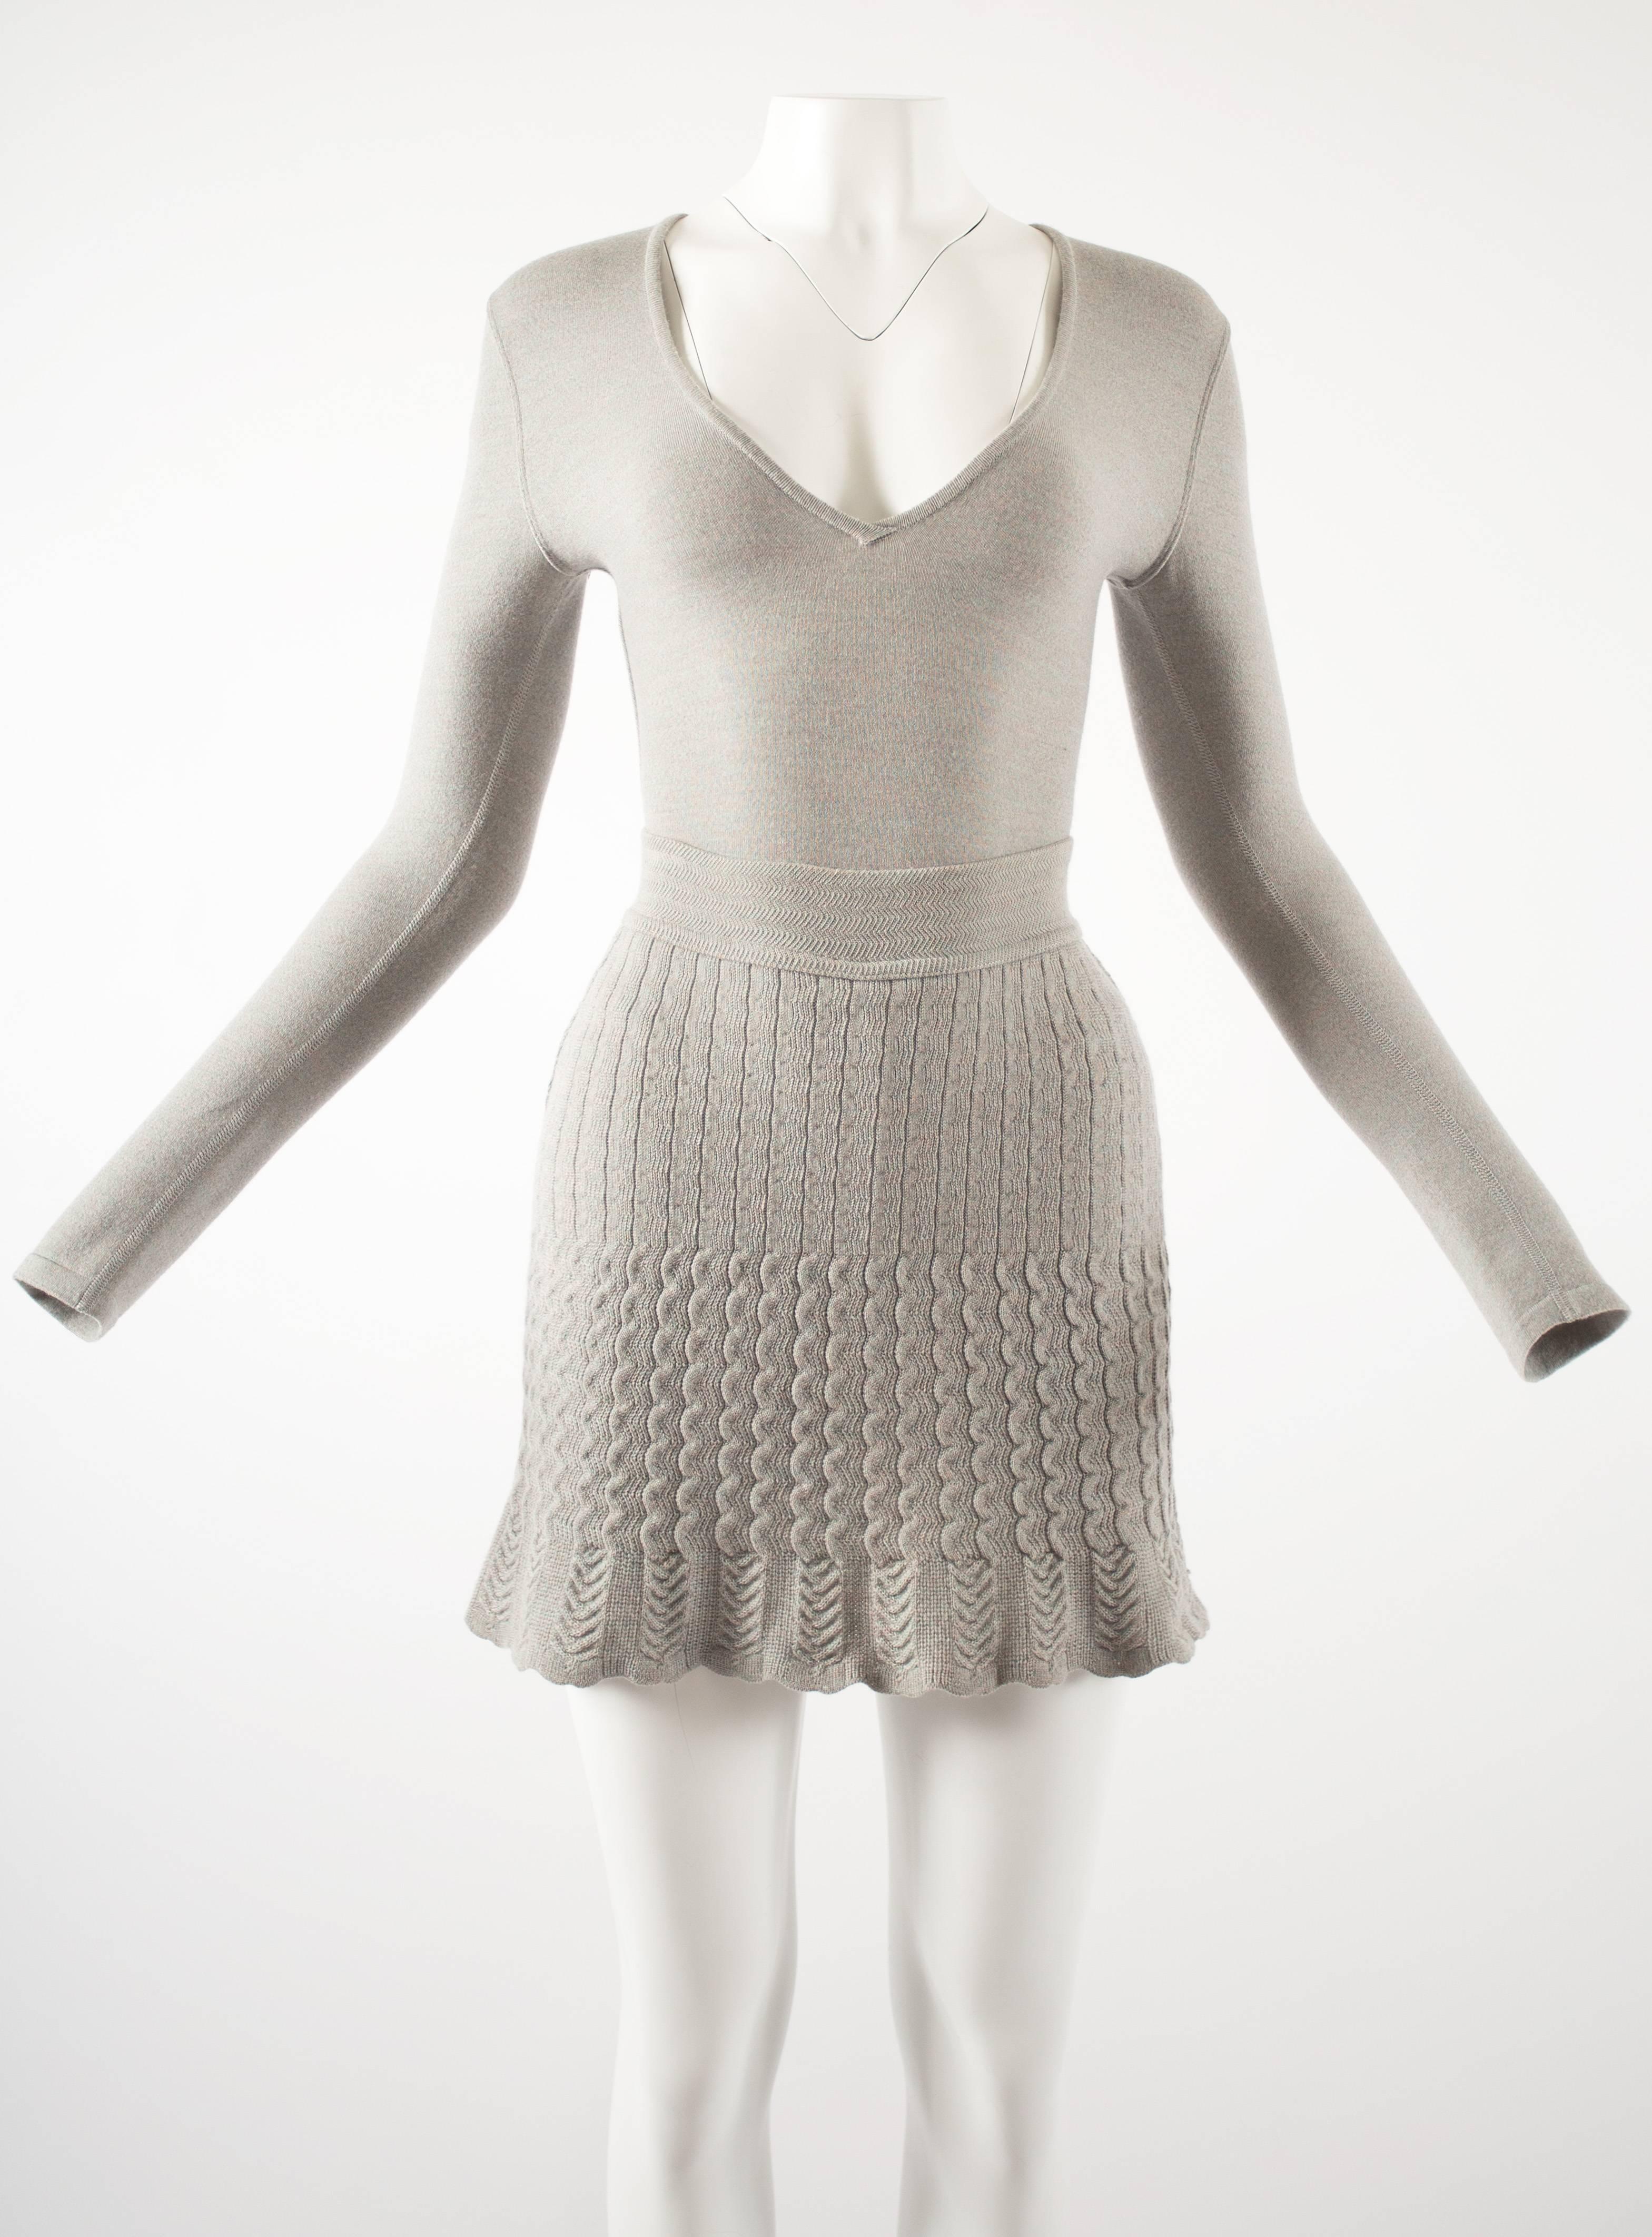 Alaia 1990s dove grey knitted bodysuit and mini skirt ensemble 

- high rise body suit with long fitted sleeves, snap button fastening and zip closure
- high waisted flared mini skirt with attached mini shorts inside